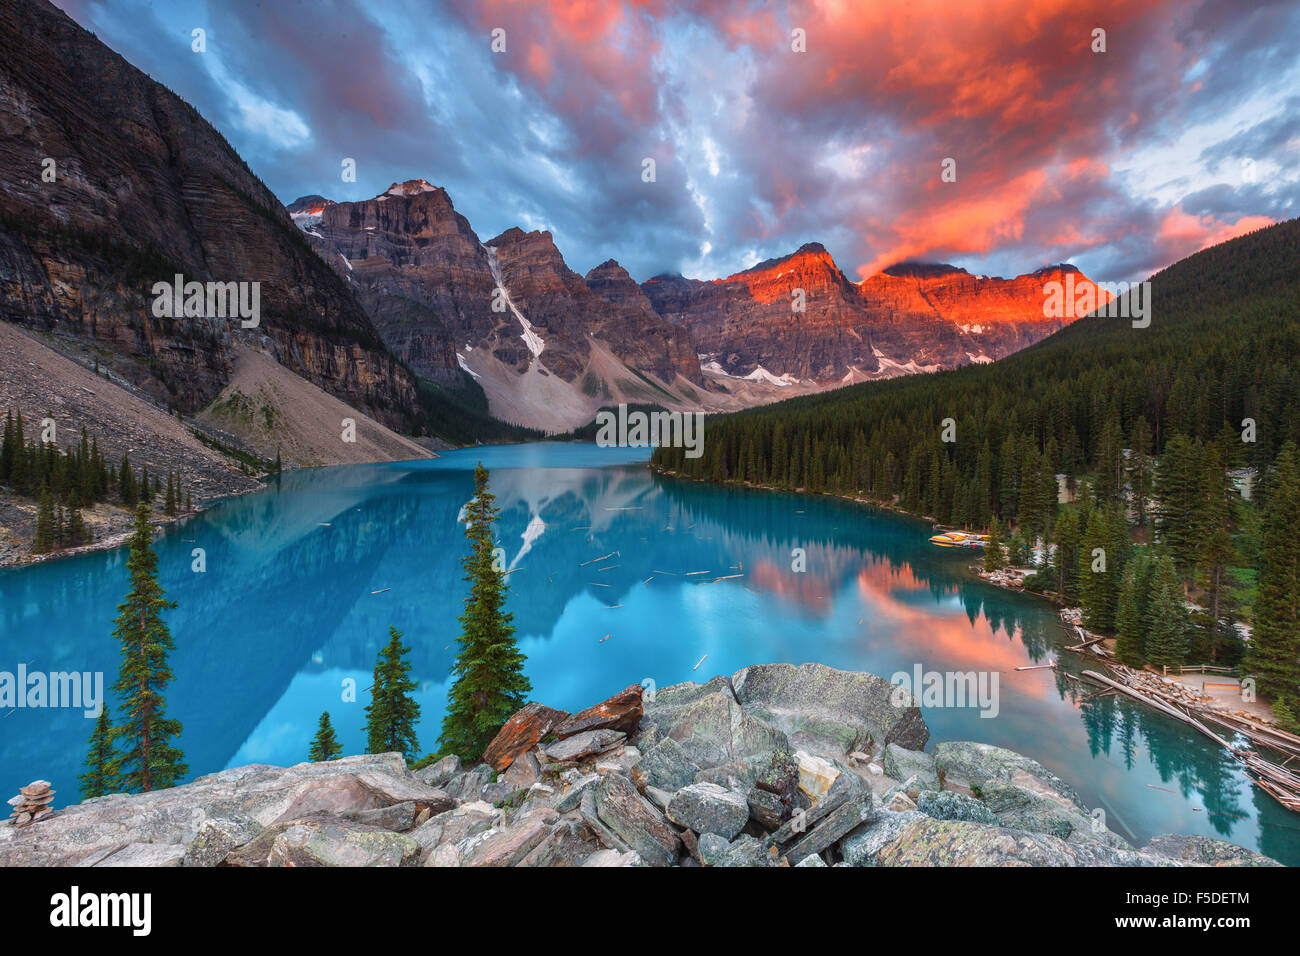 The wonderful Moraine Lake by an incredible sunrise, in Banff National Park, Alberta, Canada (Canadian Rocky Mountains). Stock Photo